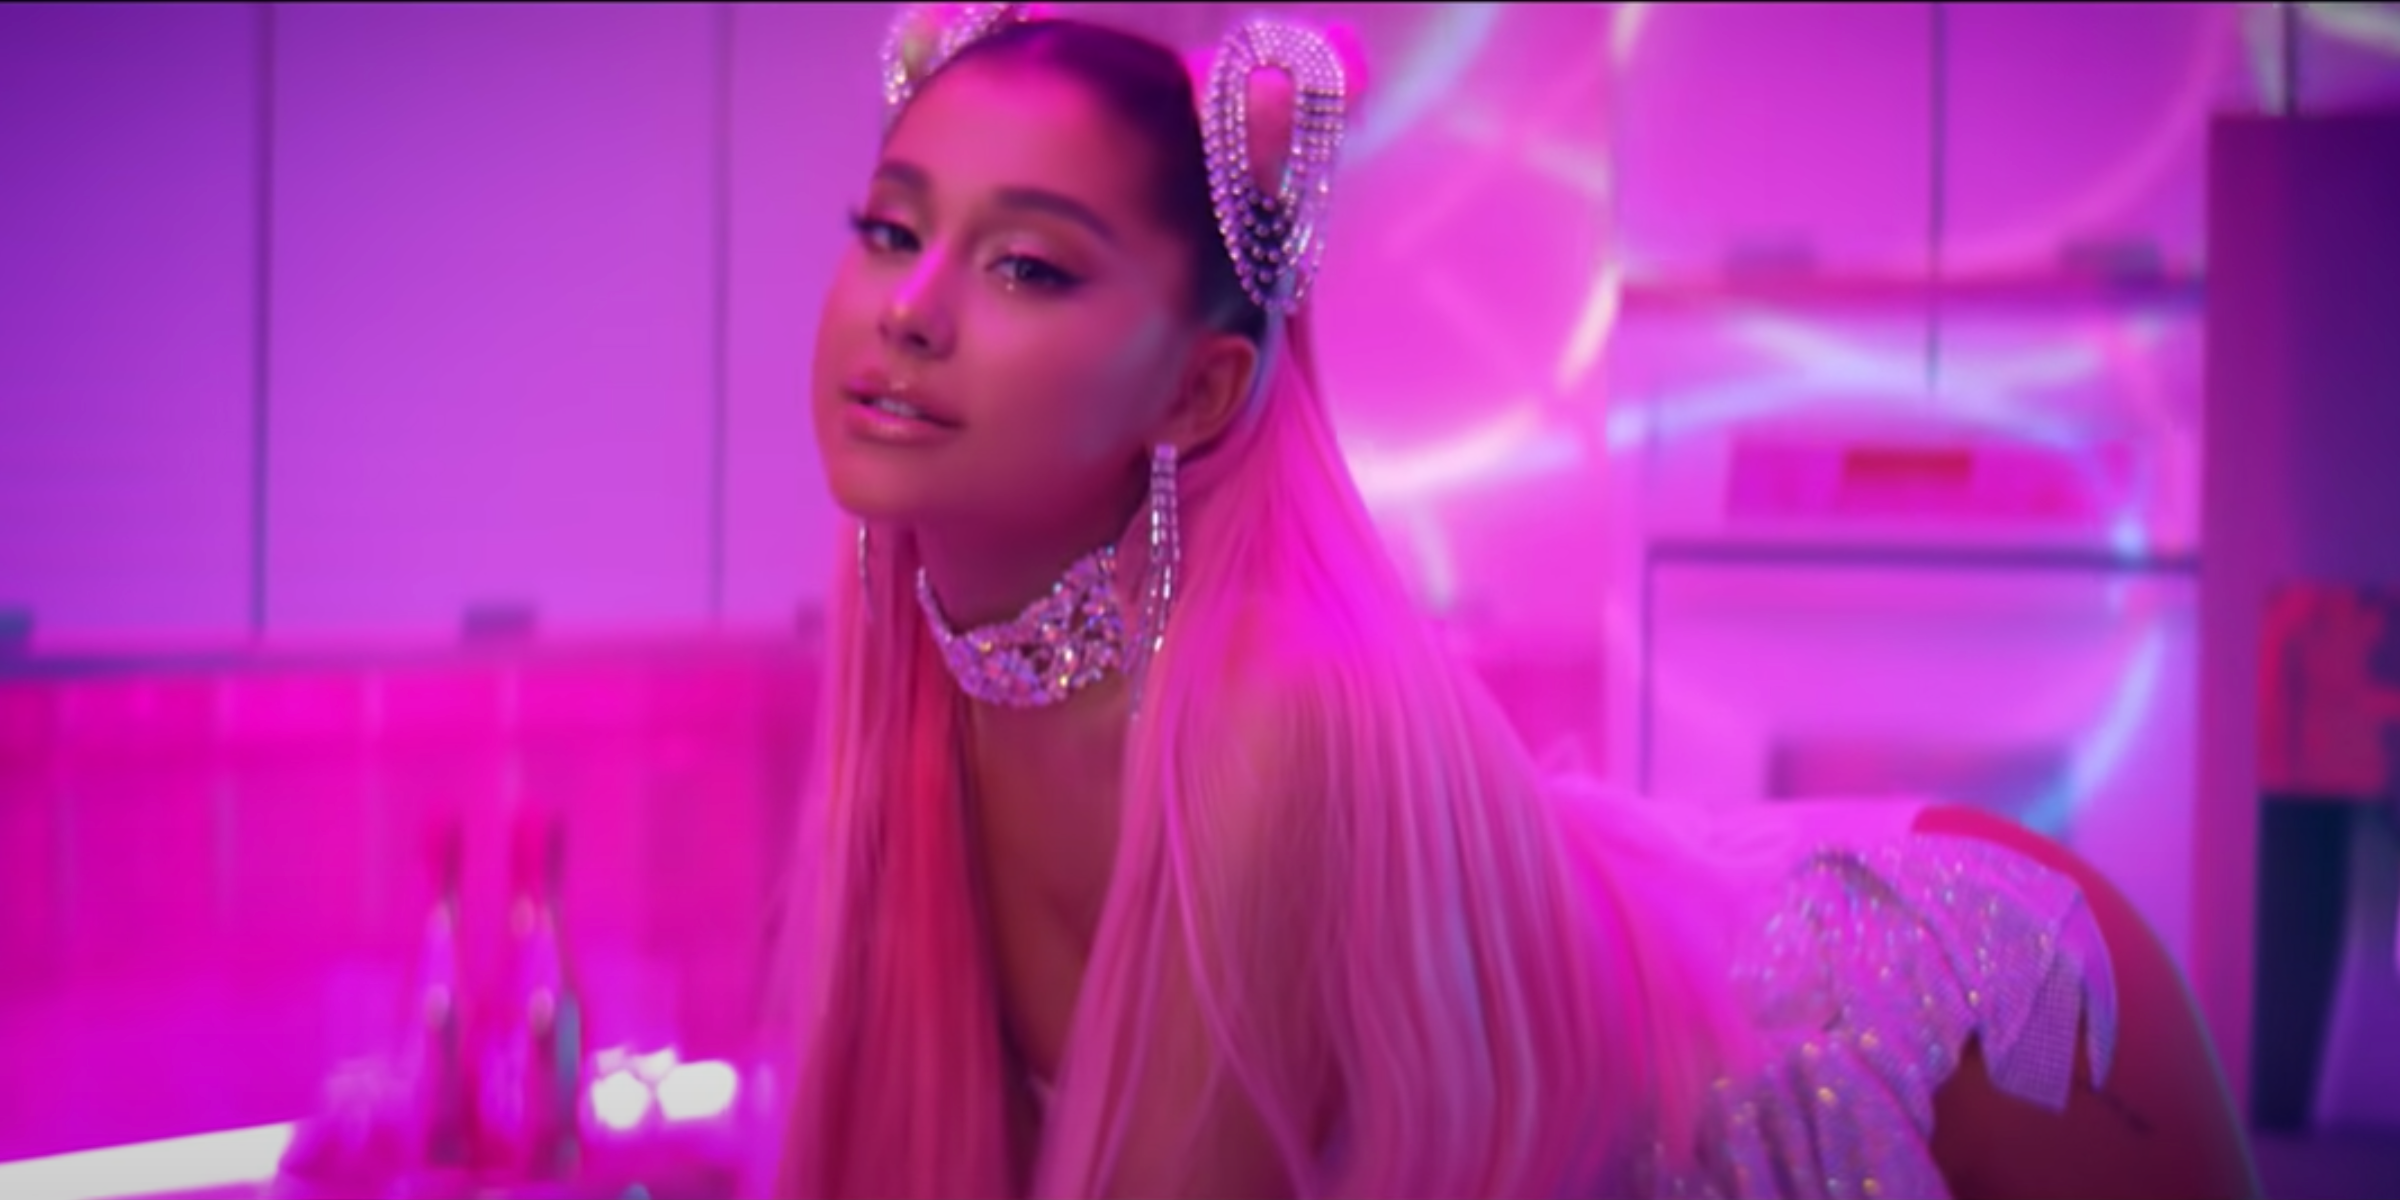 An image of Ariana Grande gazing at the viewer in her music video for 7 Rings